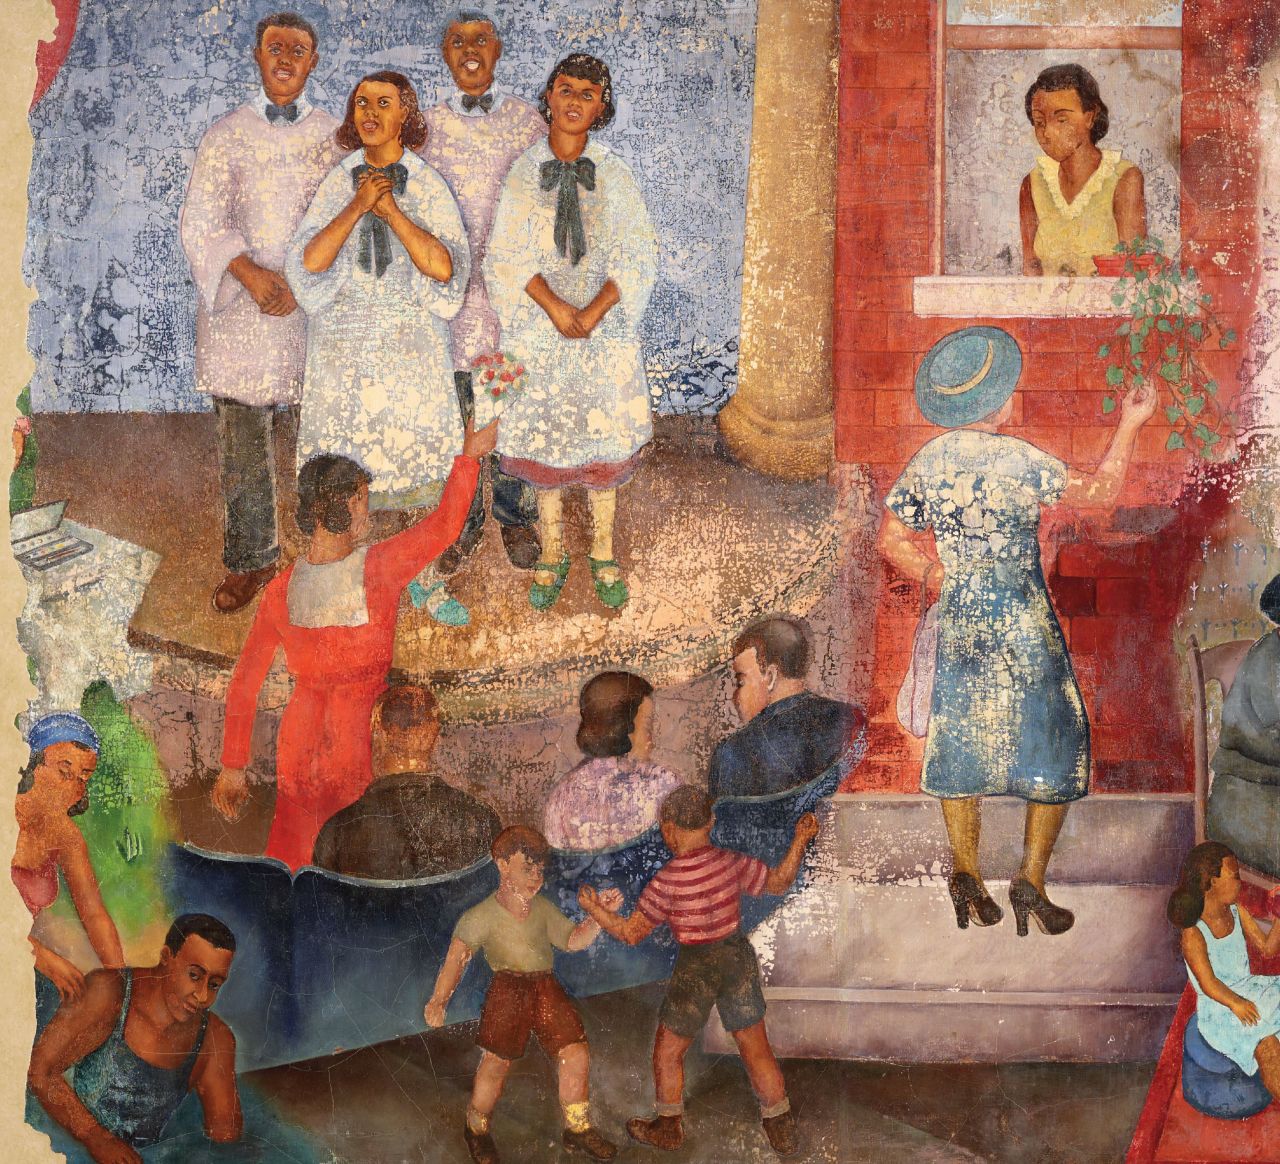 "Recreation in Harlem" by Georgette Seabrooke shows the everyday life of Harlem residents 